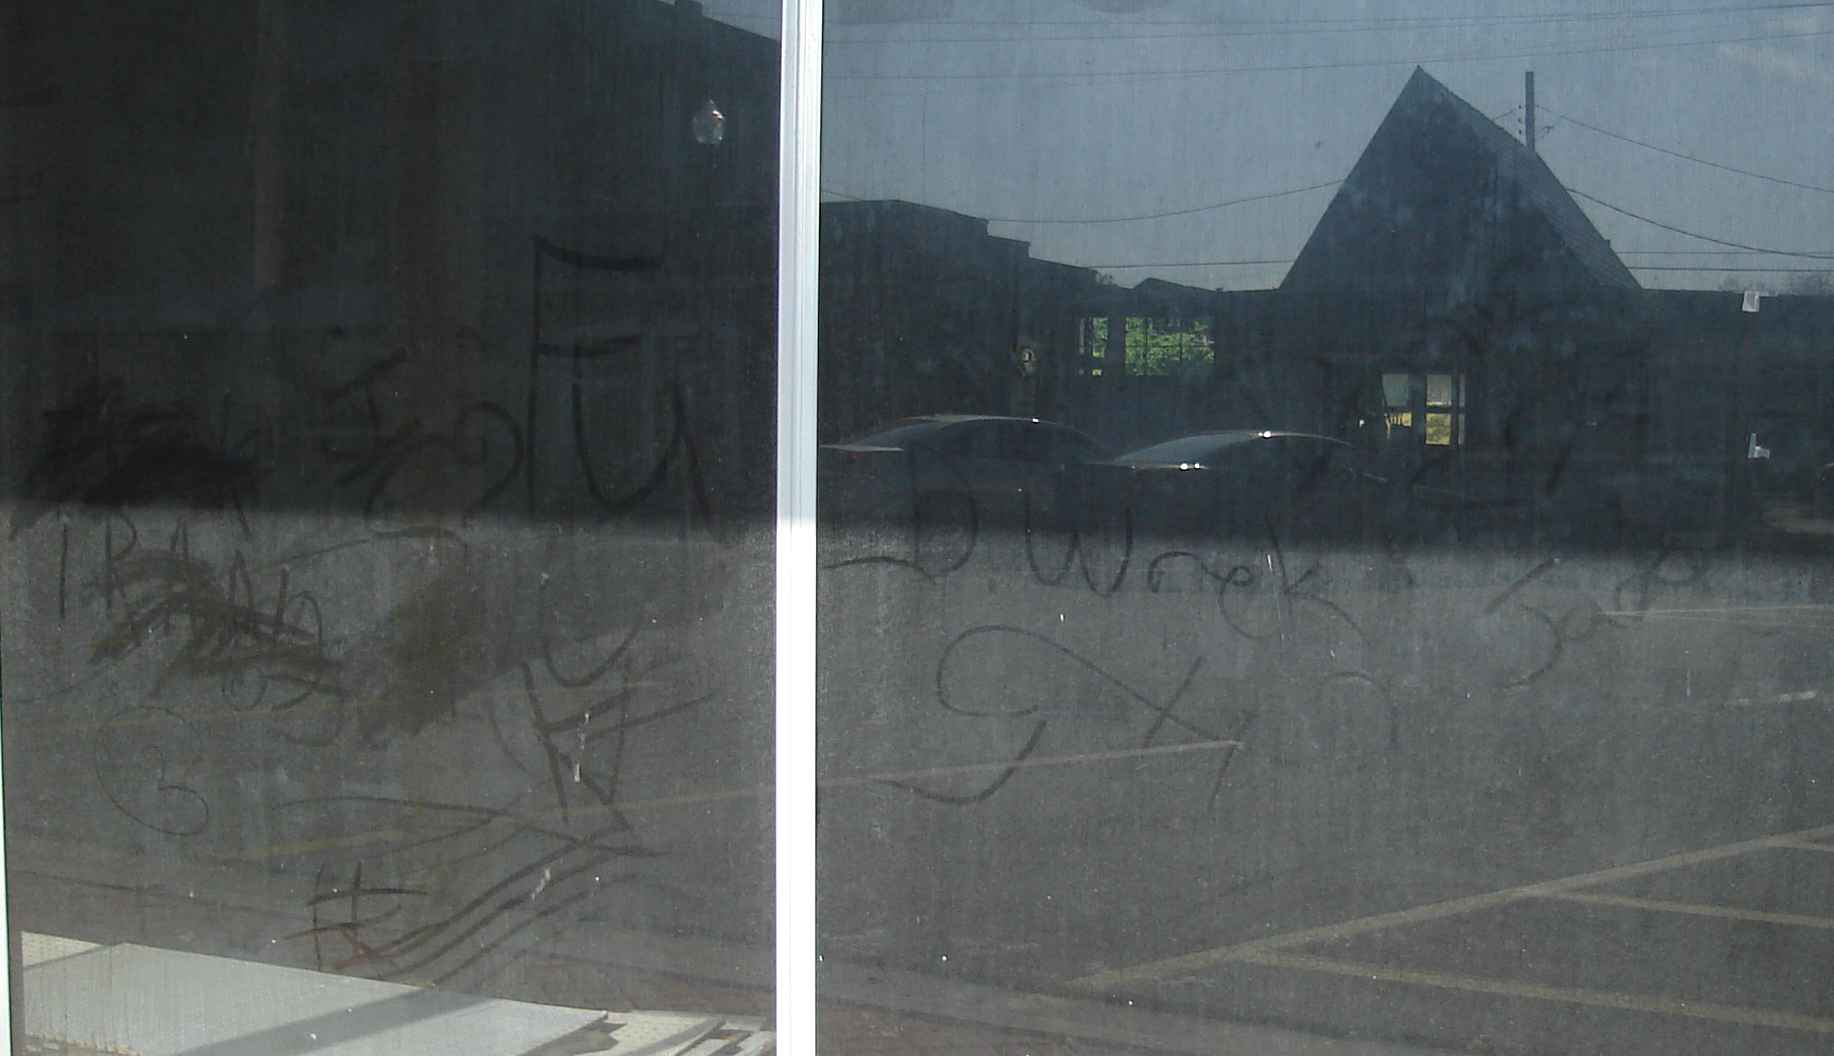 This dirty window has been tagged.